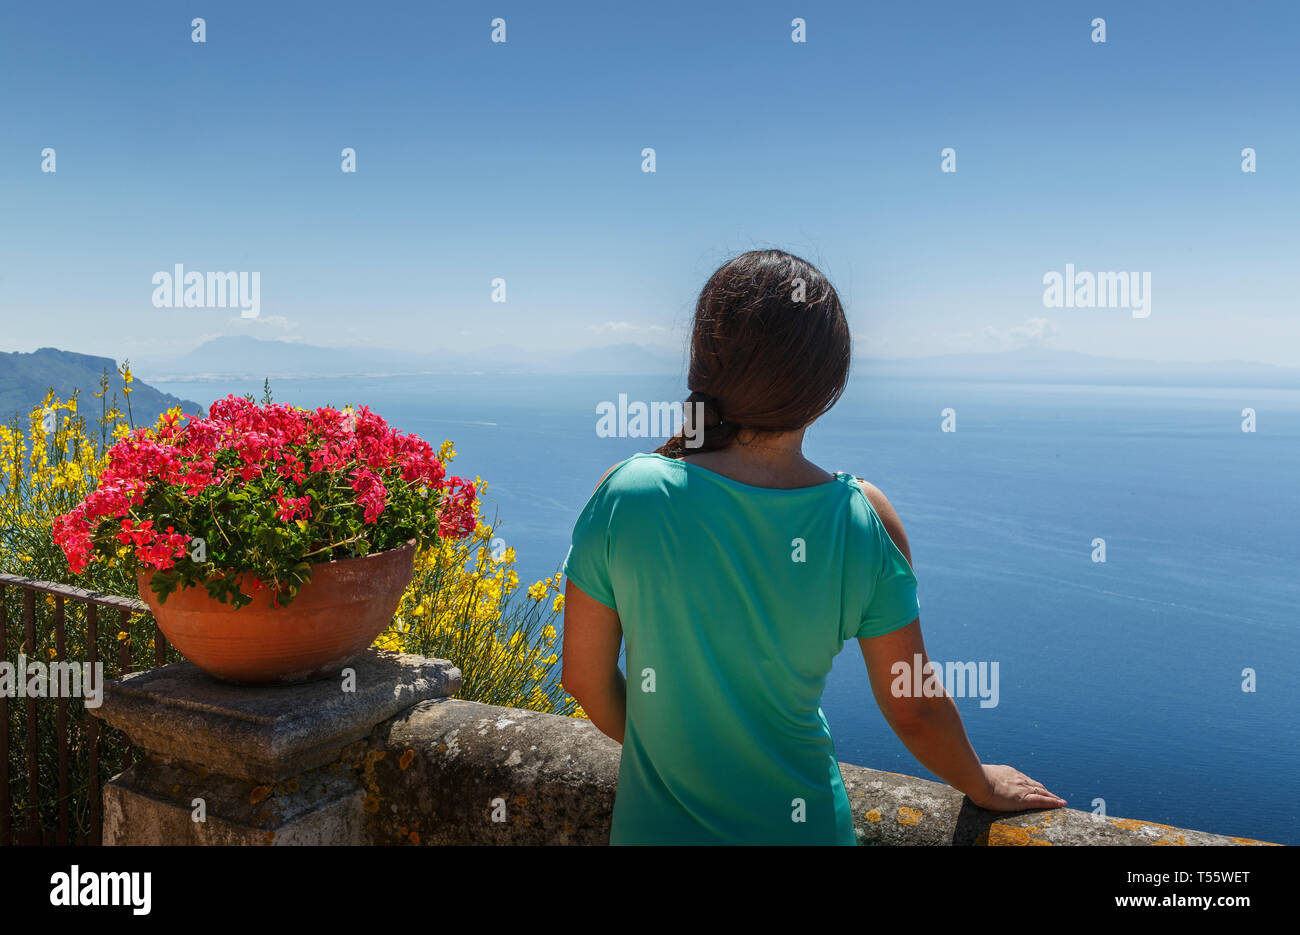 Rear view of woman by flower pot Stock Photo